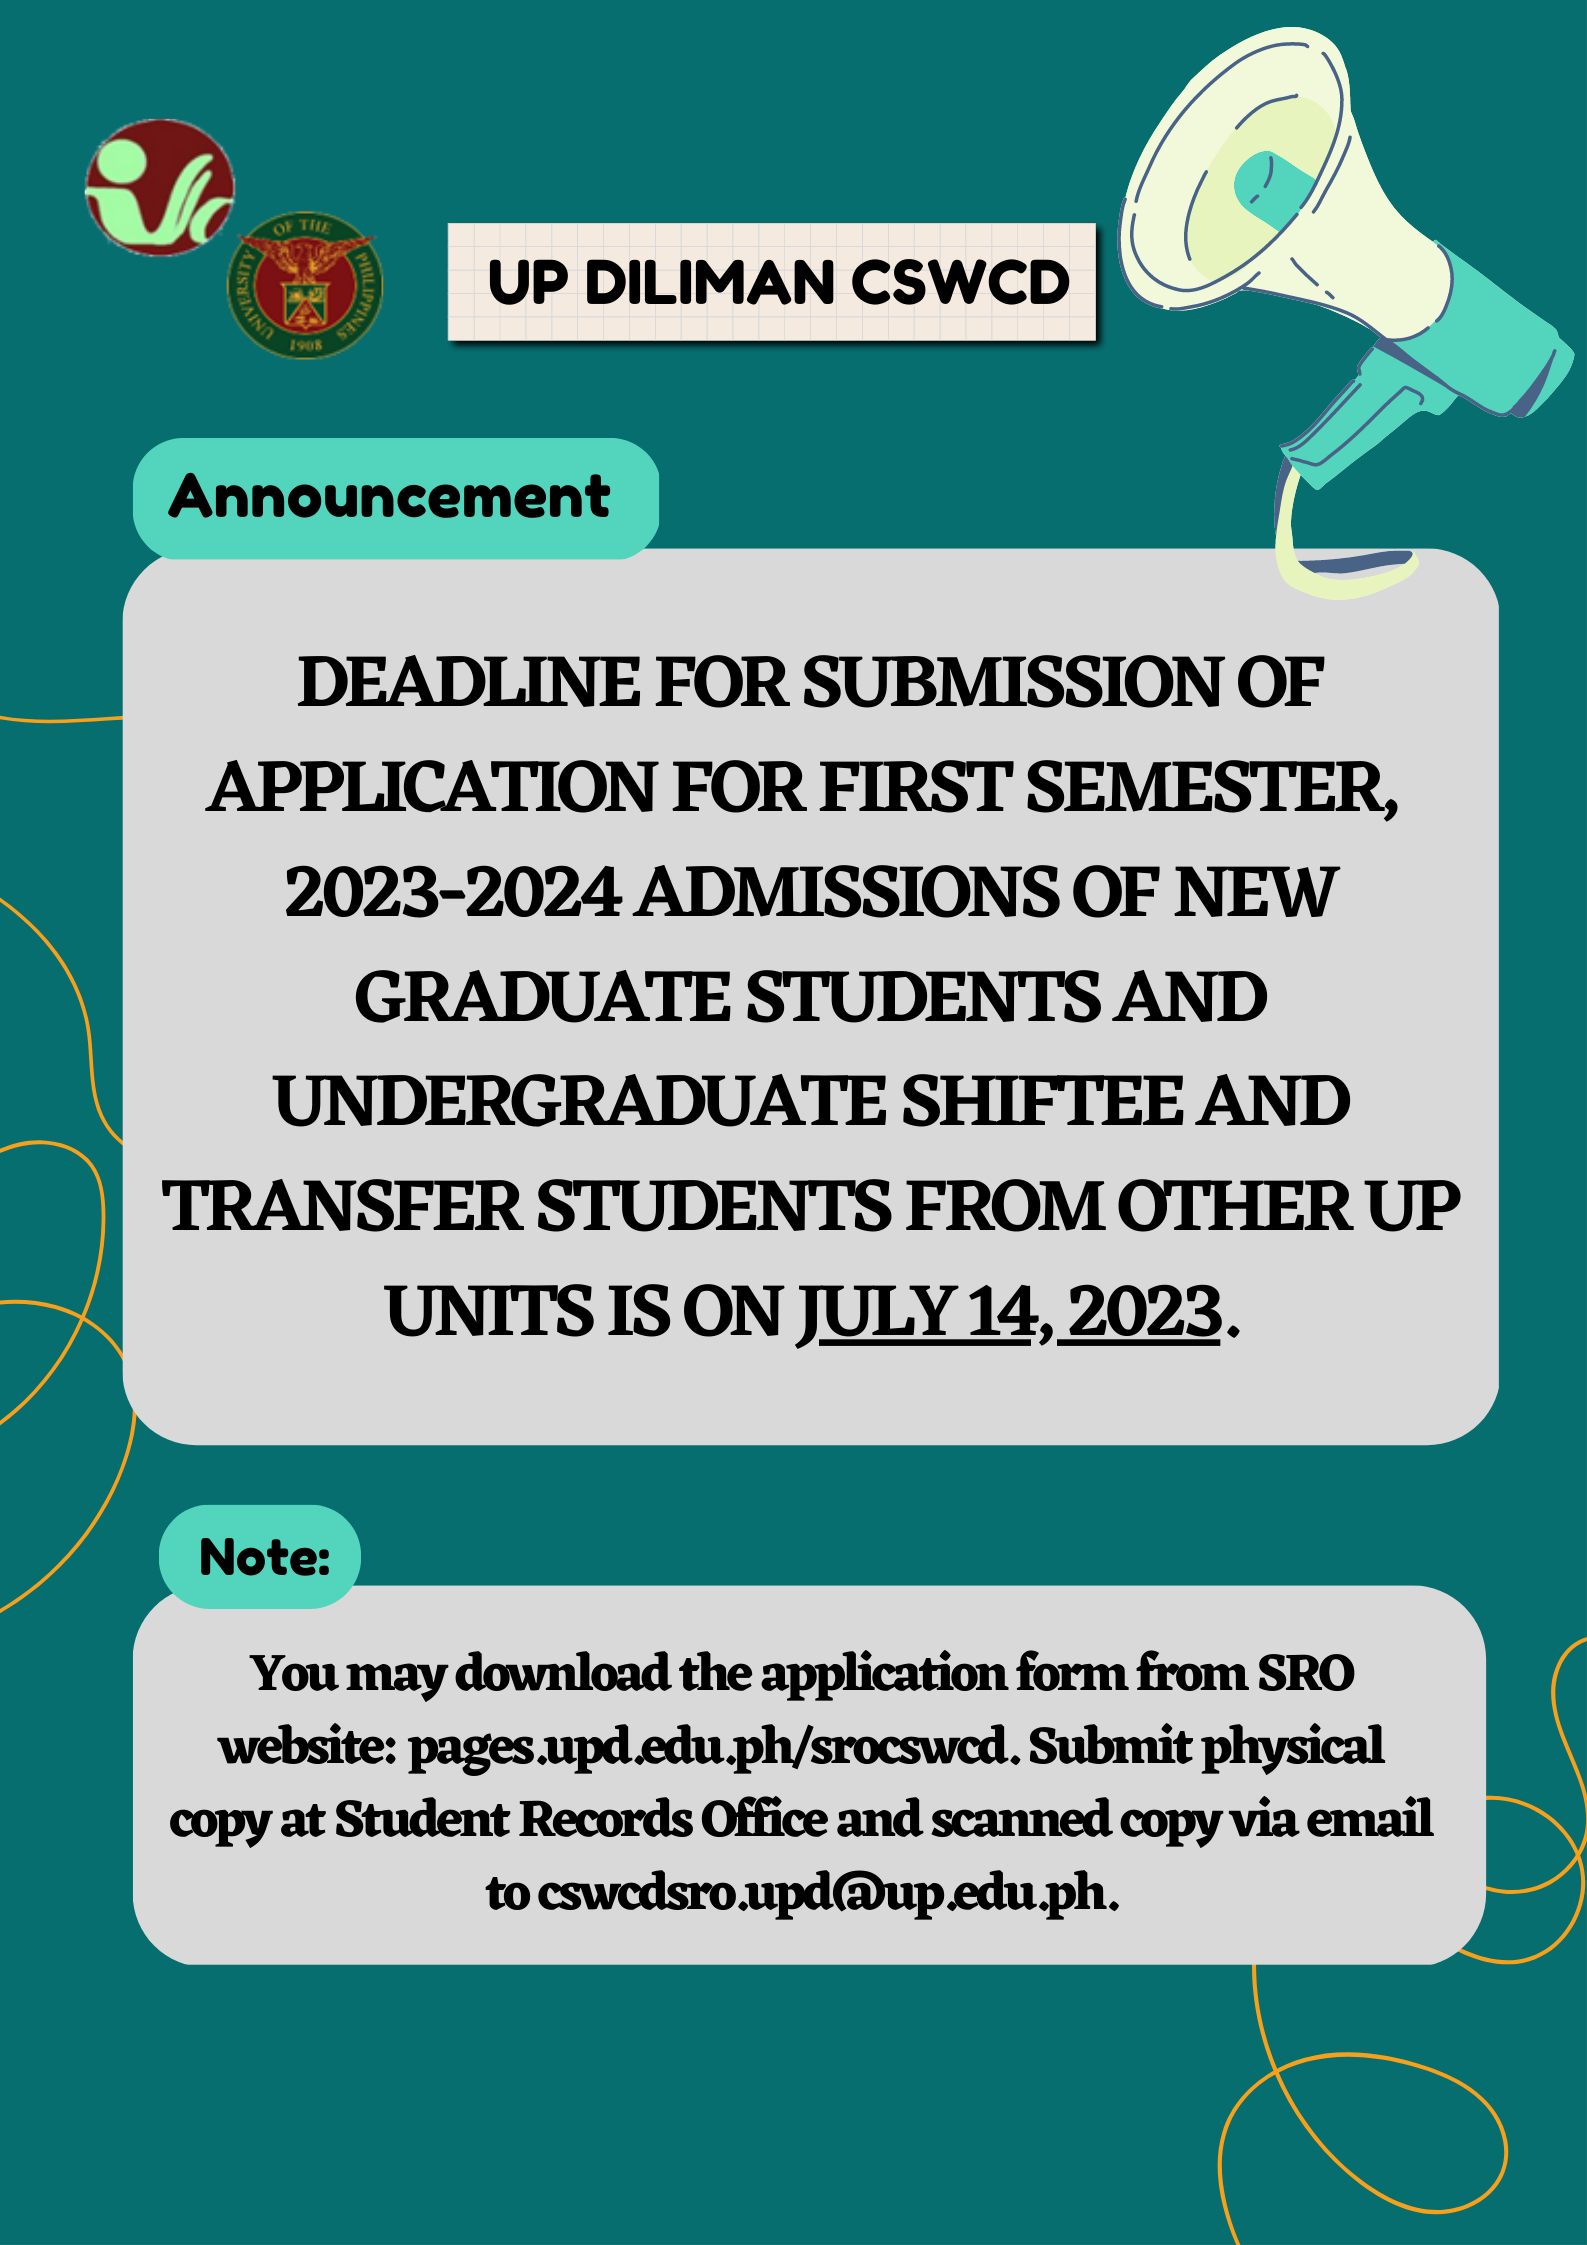 Deadline for Submission of Application for First Semester,  2023-2024 Admissions of New Graduate Students and Undergraduate Shiftee and Transfer Students from other UP units is on JULY 14, 2023